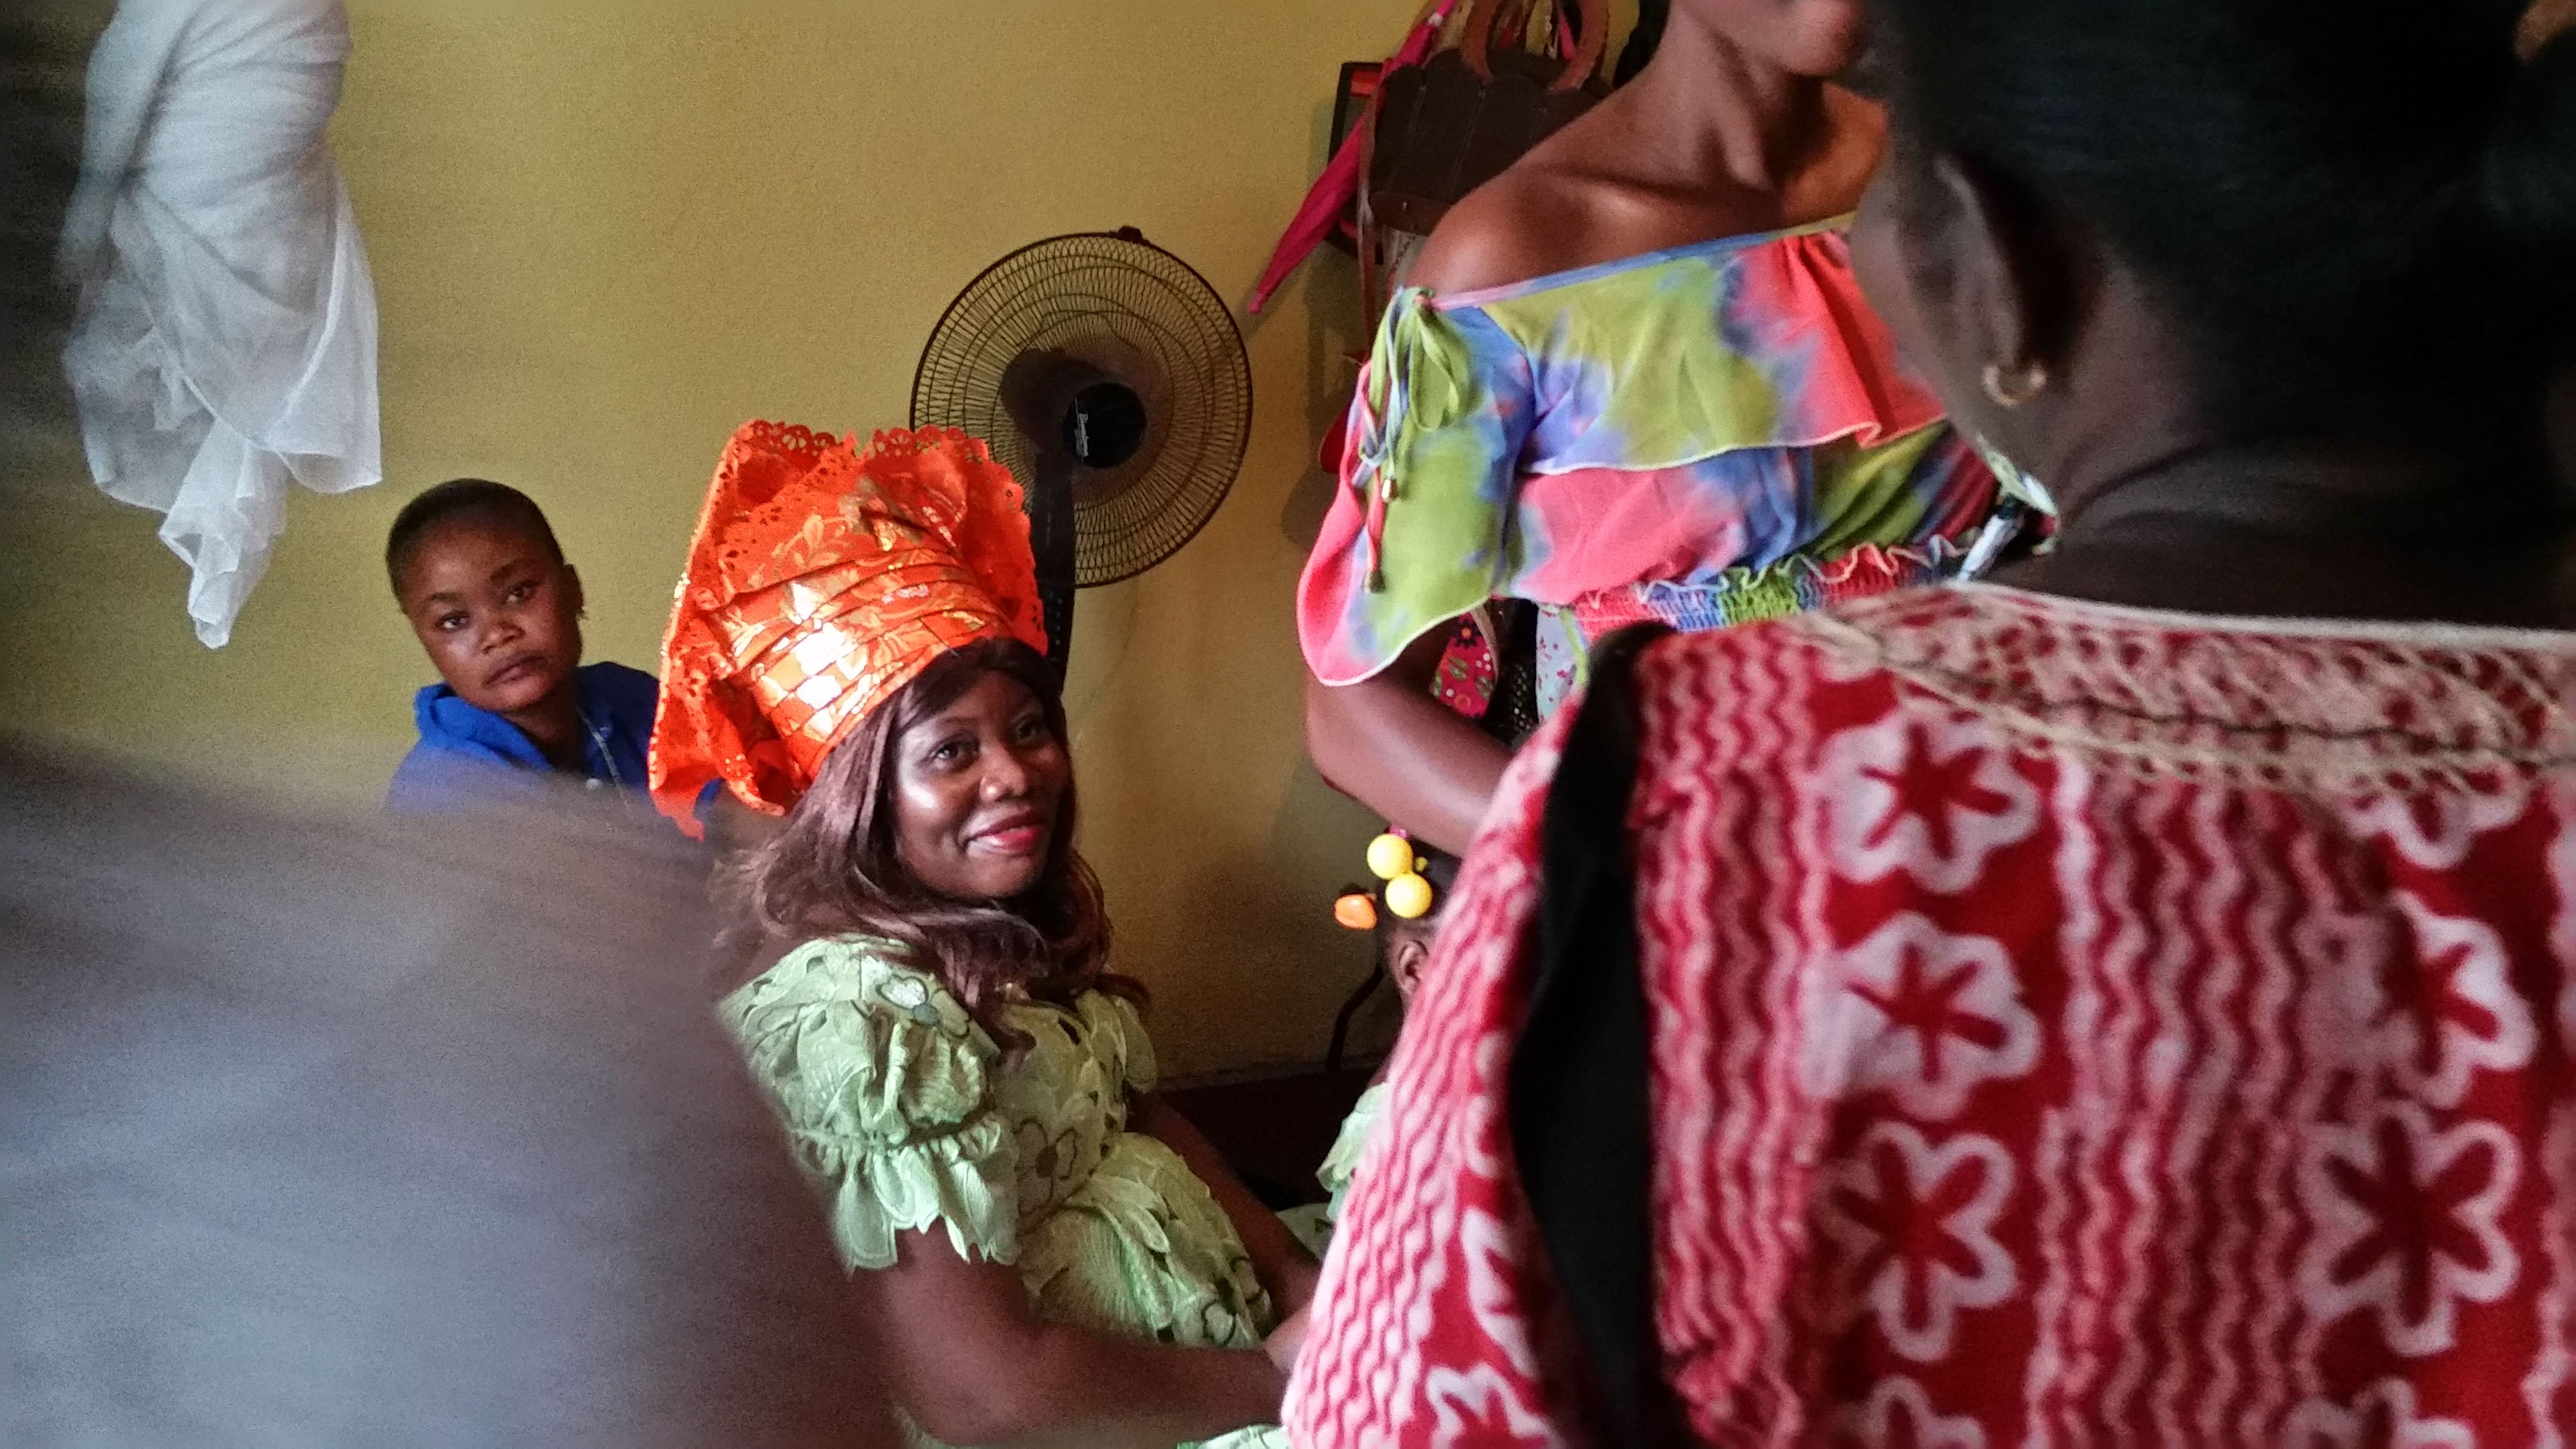 Salome Karwah, Ebola survivor and Ebola nurse, waits in her sister's bedroom on her wedding day as her aunts ask the groom's family for money, in a Liberian tradition known as Bride Price. In February 2017 she died from complications during childbirth. Image by Seema Yasmin. Liberia, 2015.